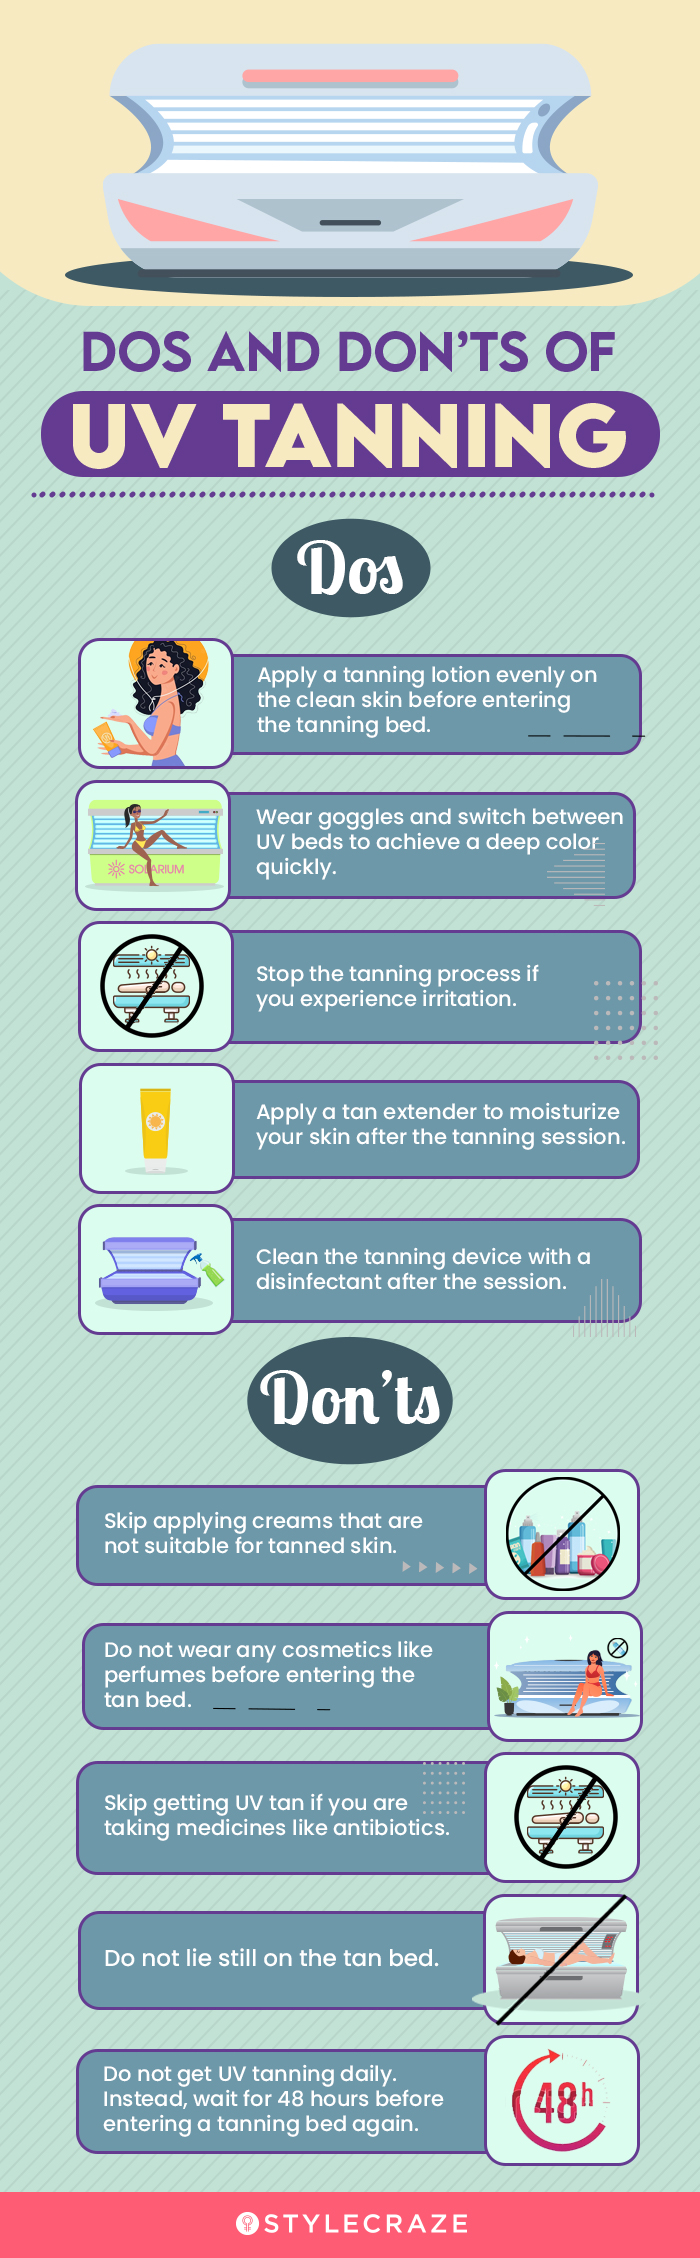 Do’s And Don’ts Of UV Tanning[infographic]